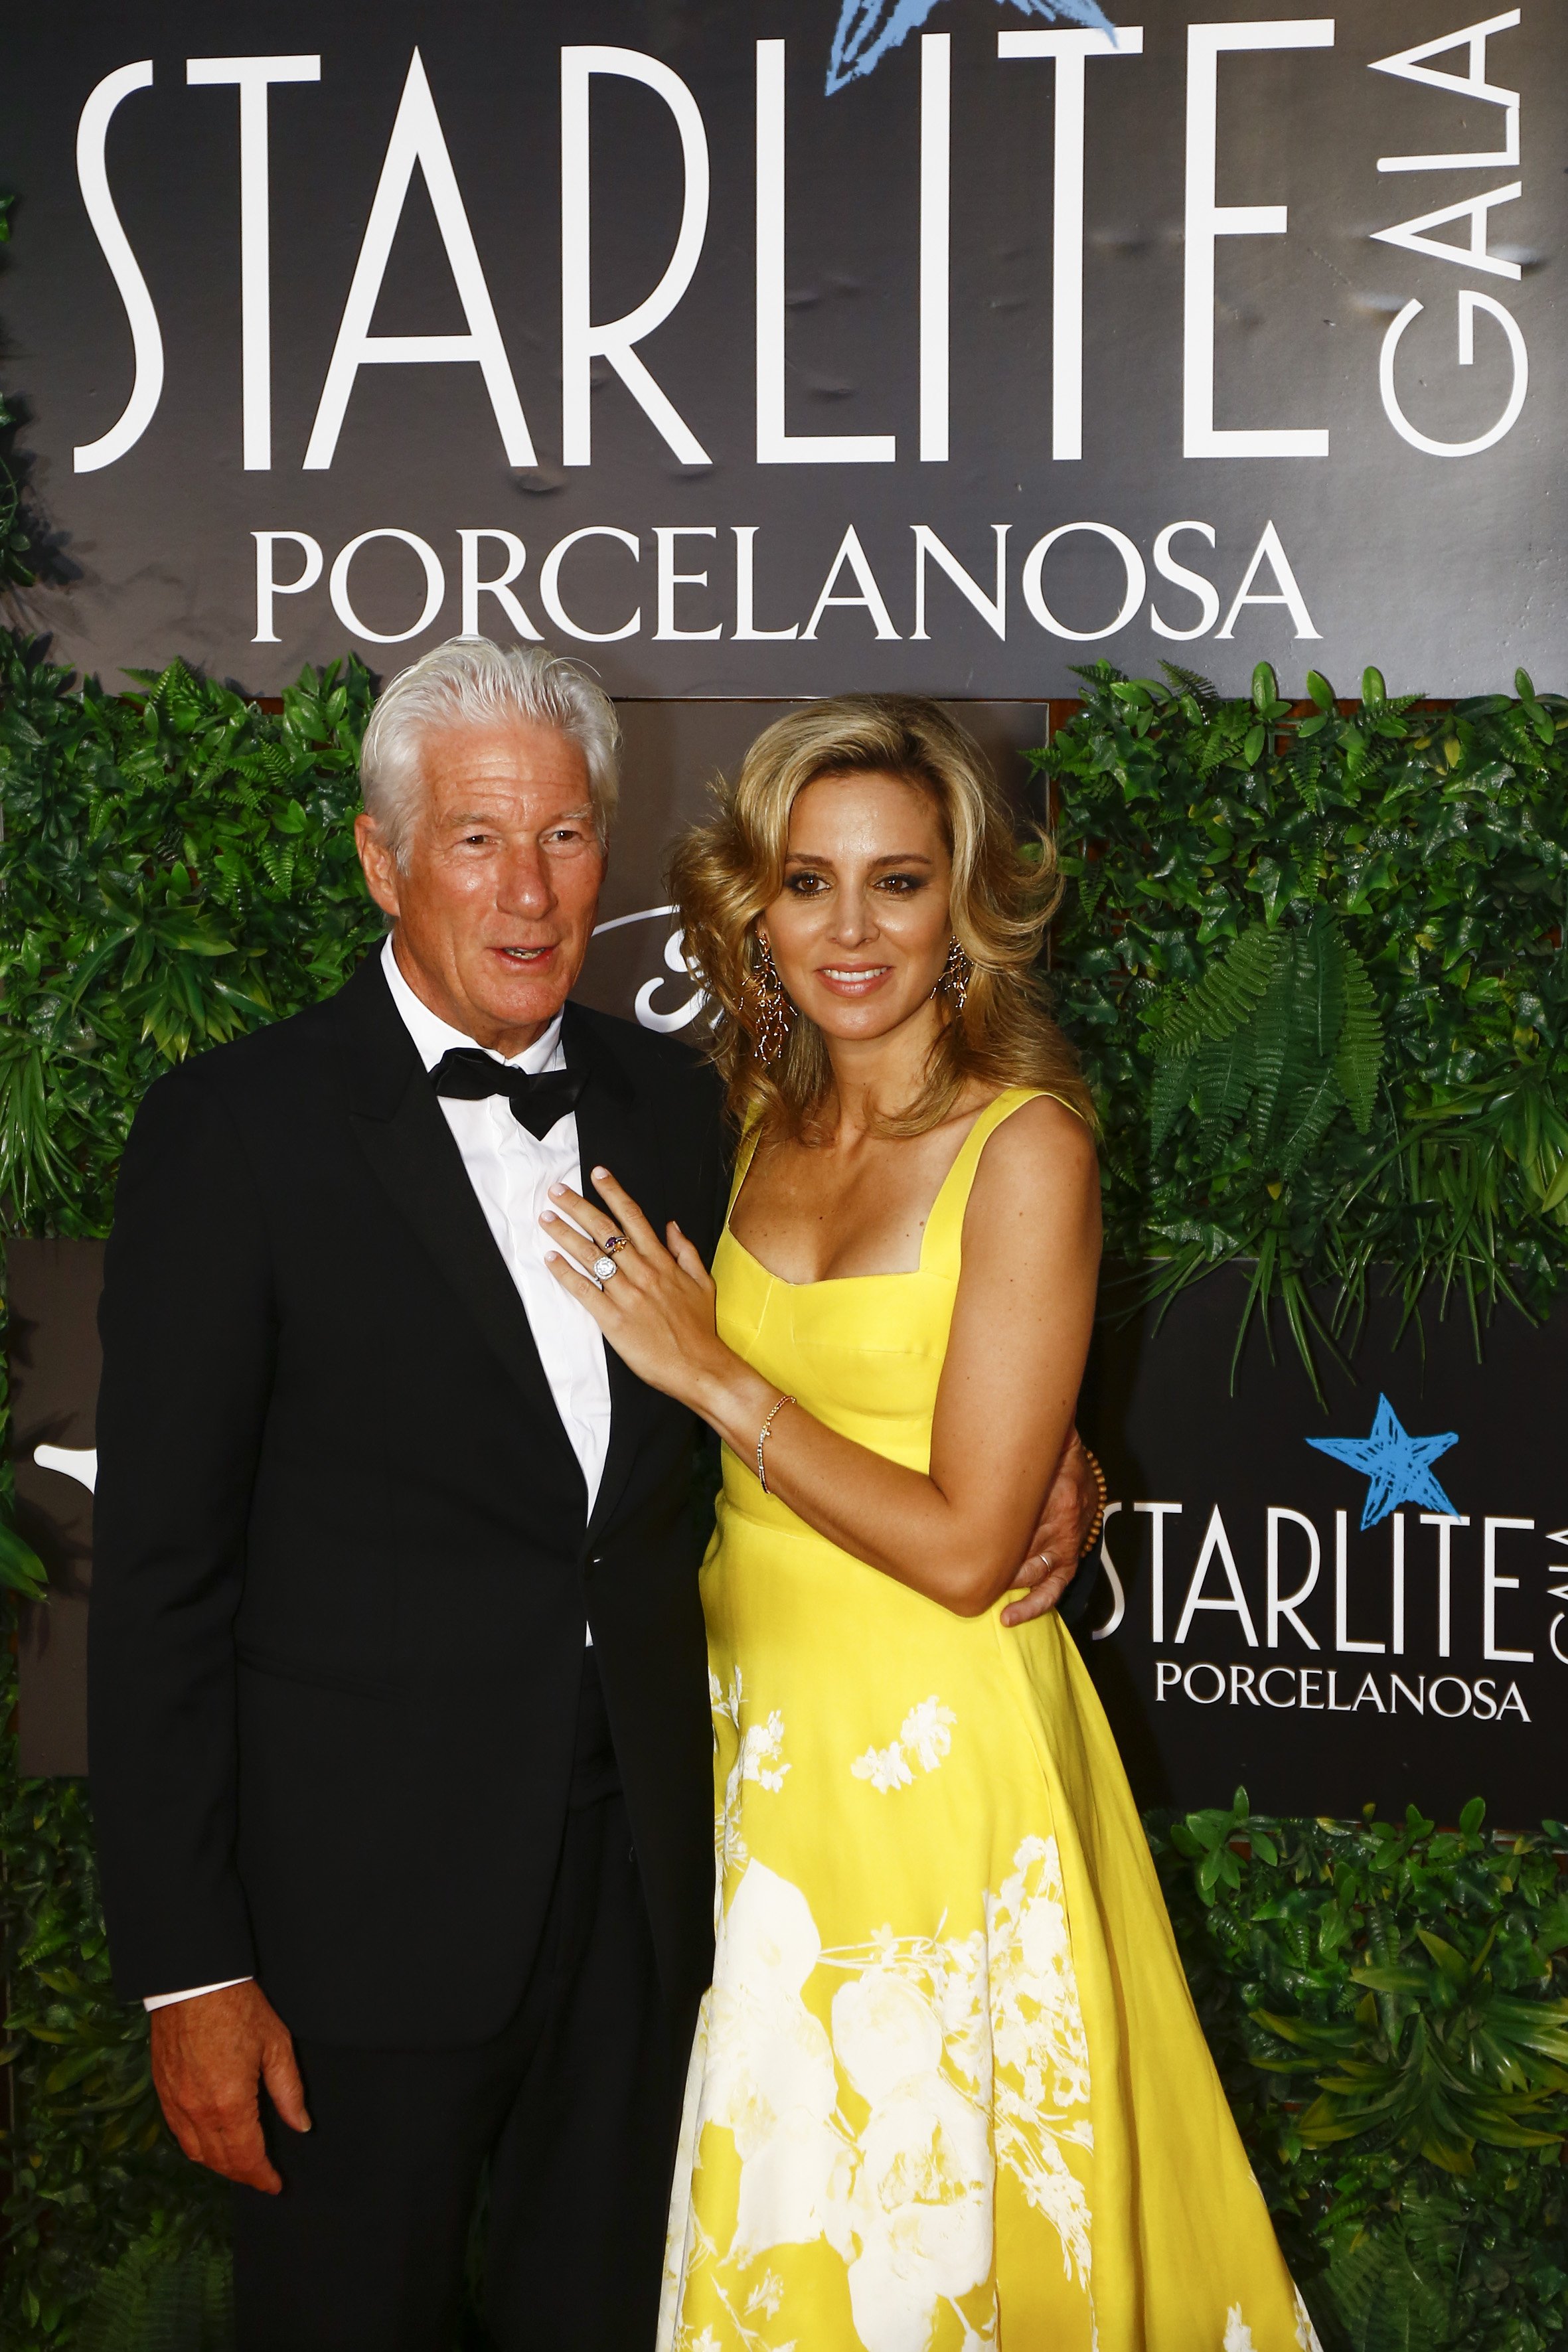 Actor Richard Gere and publicist Alejandra Silva attend the Starlite Porcelanosa Gala 2022 at La Cantera on August 14, 2022 in Marbella, Spain | Source: Getty Images